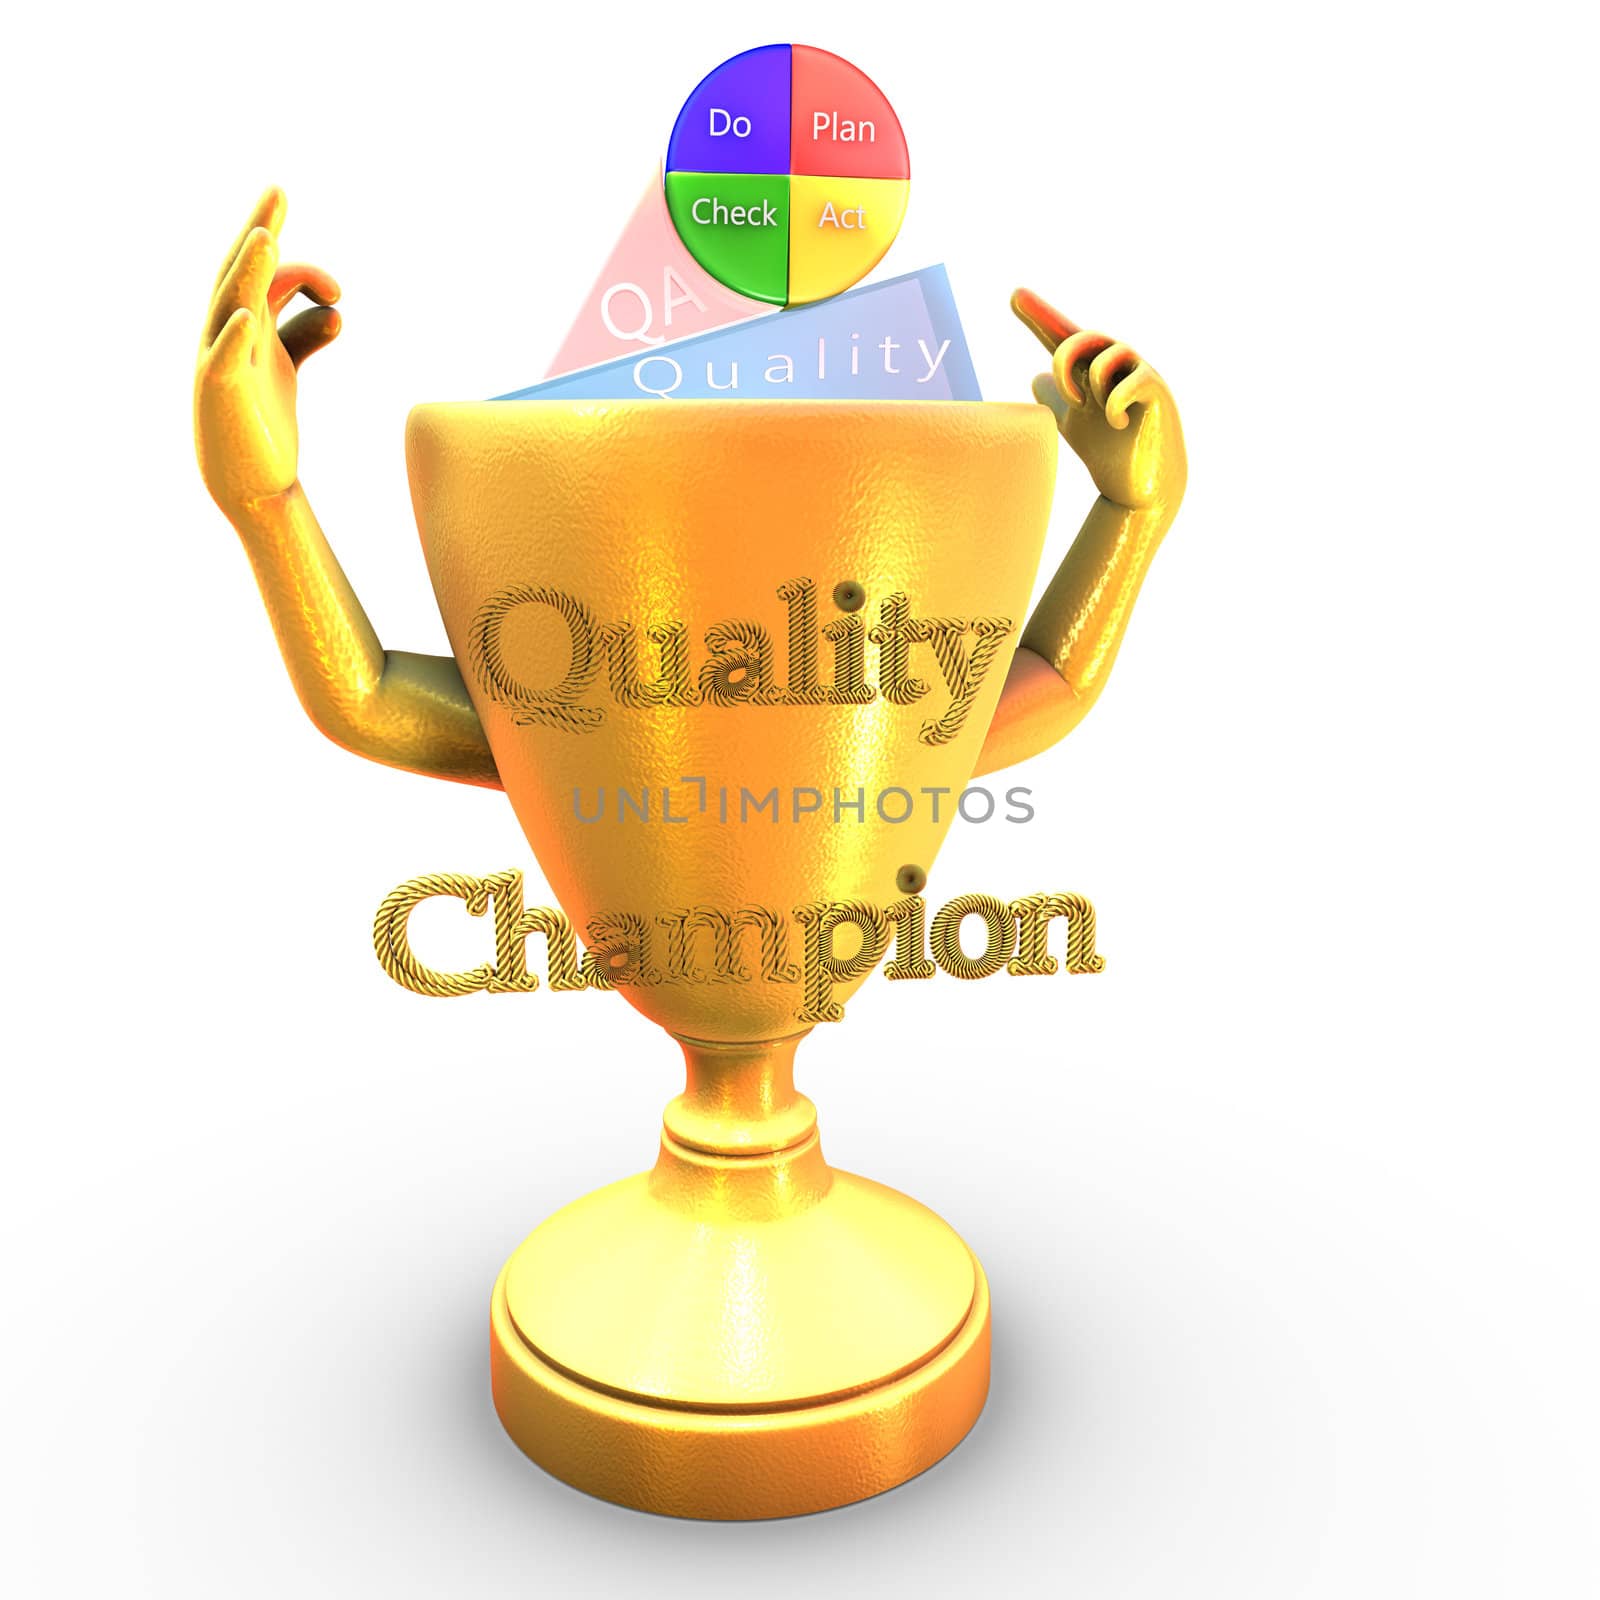 Quality champion cup by ytjo